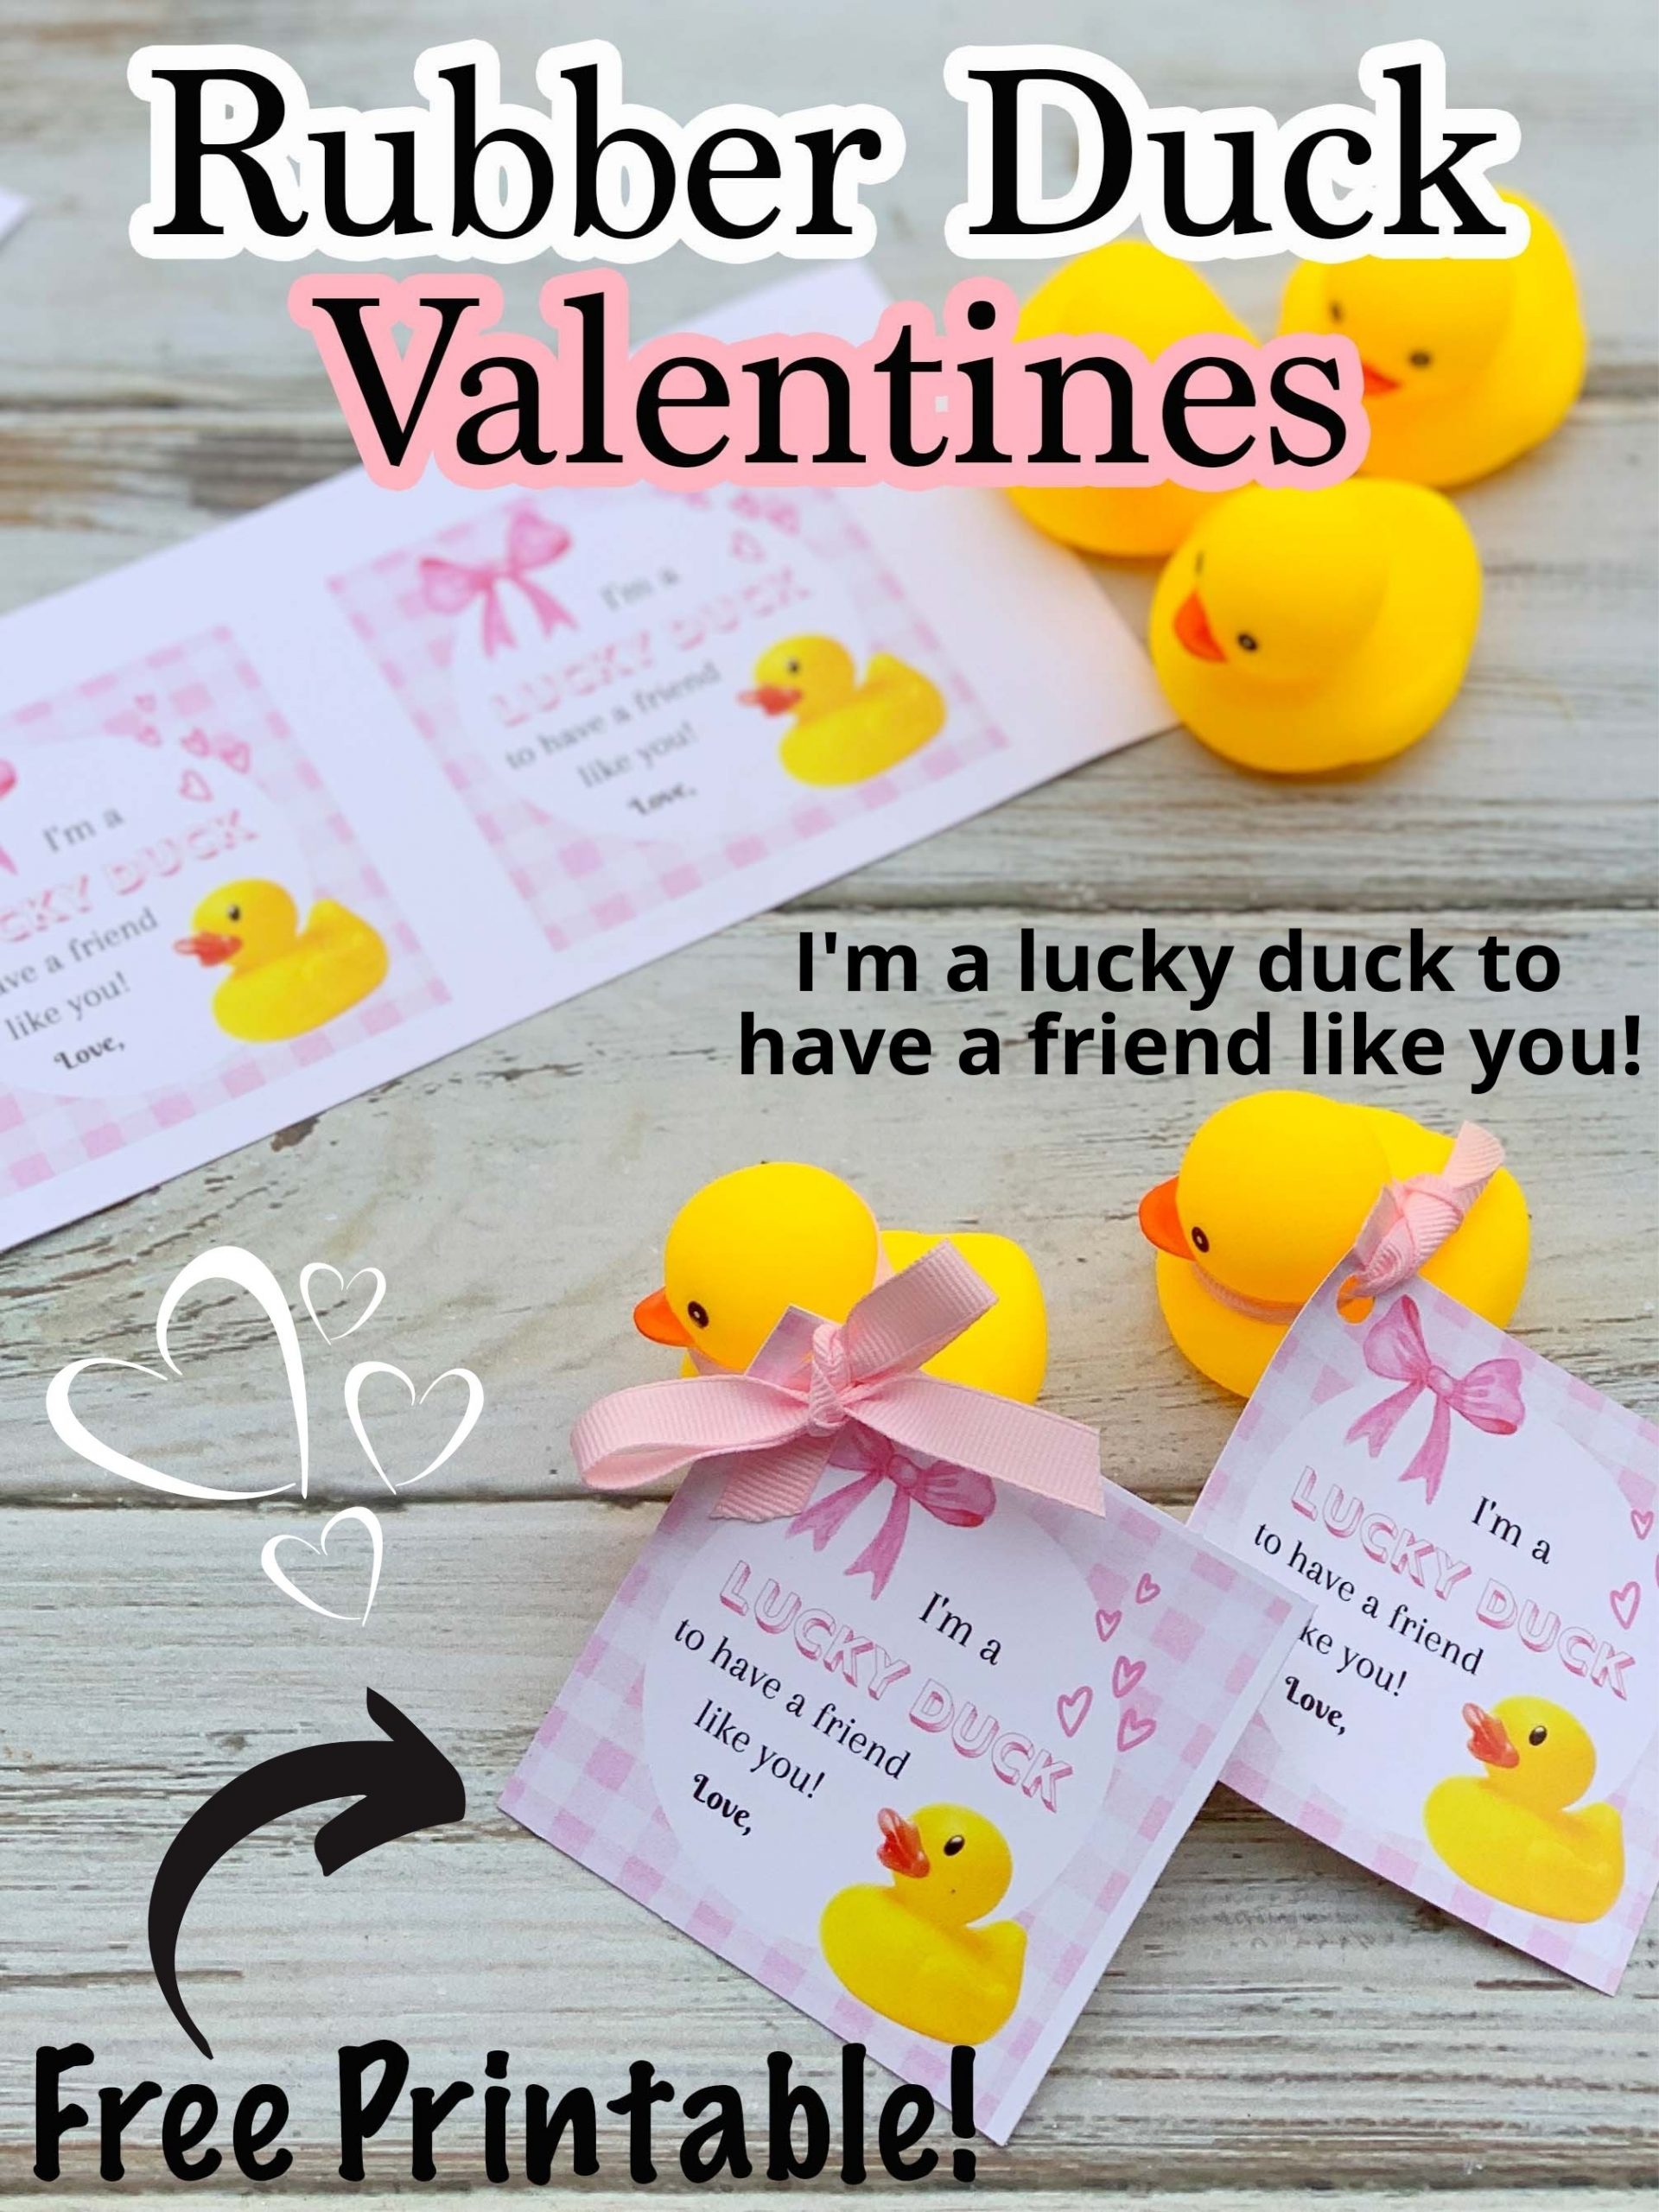 Free printable rubber duck valentines for kids